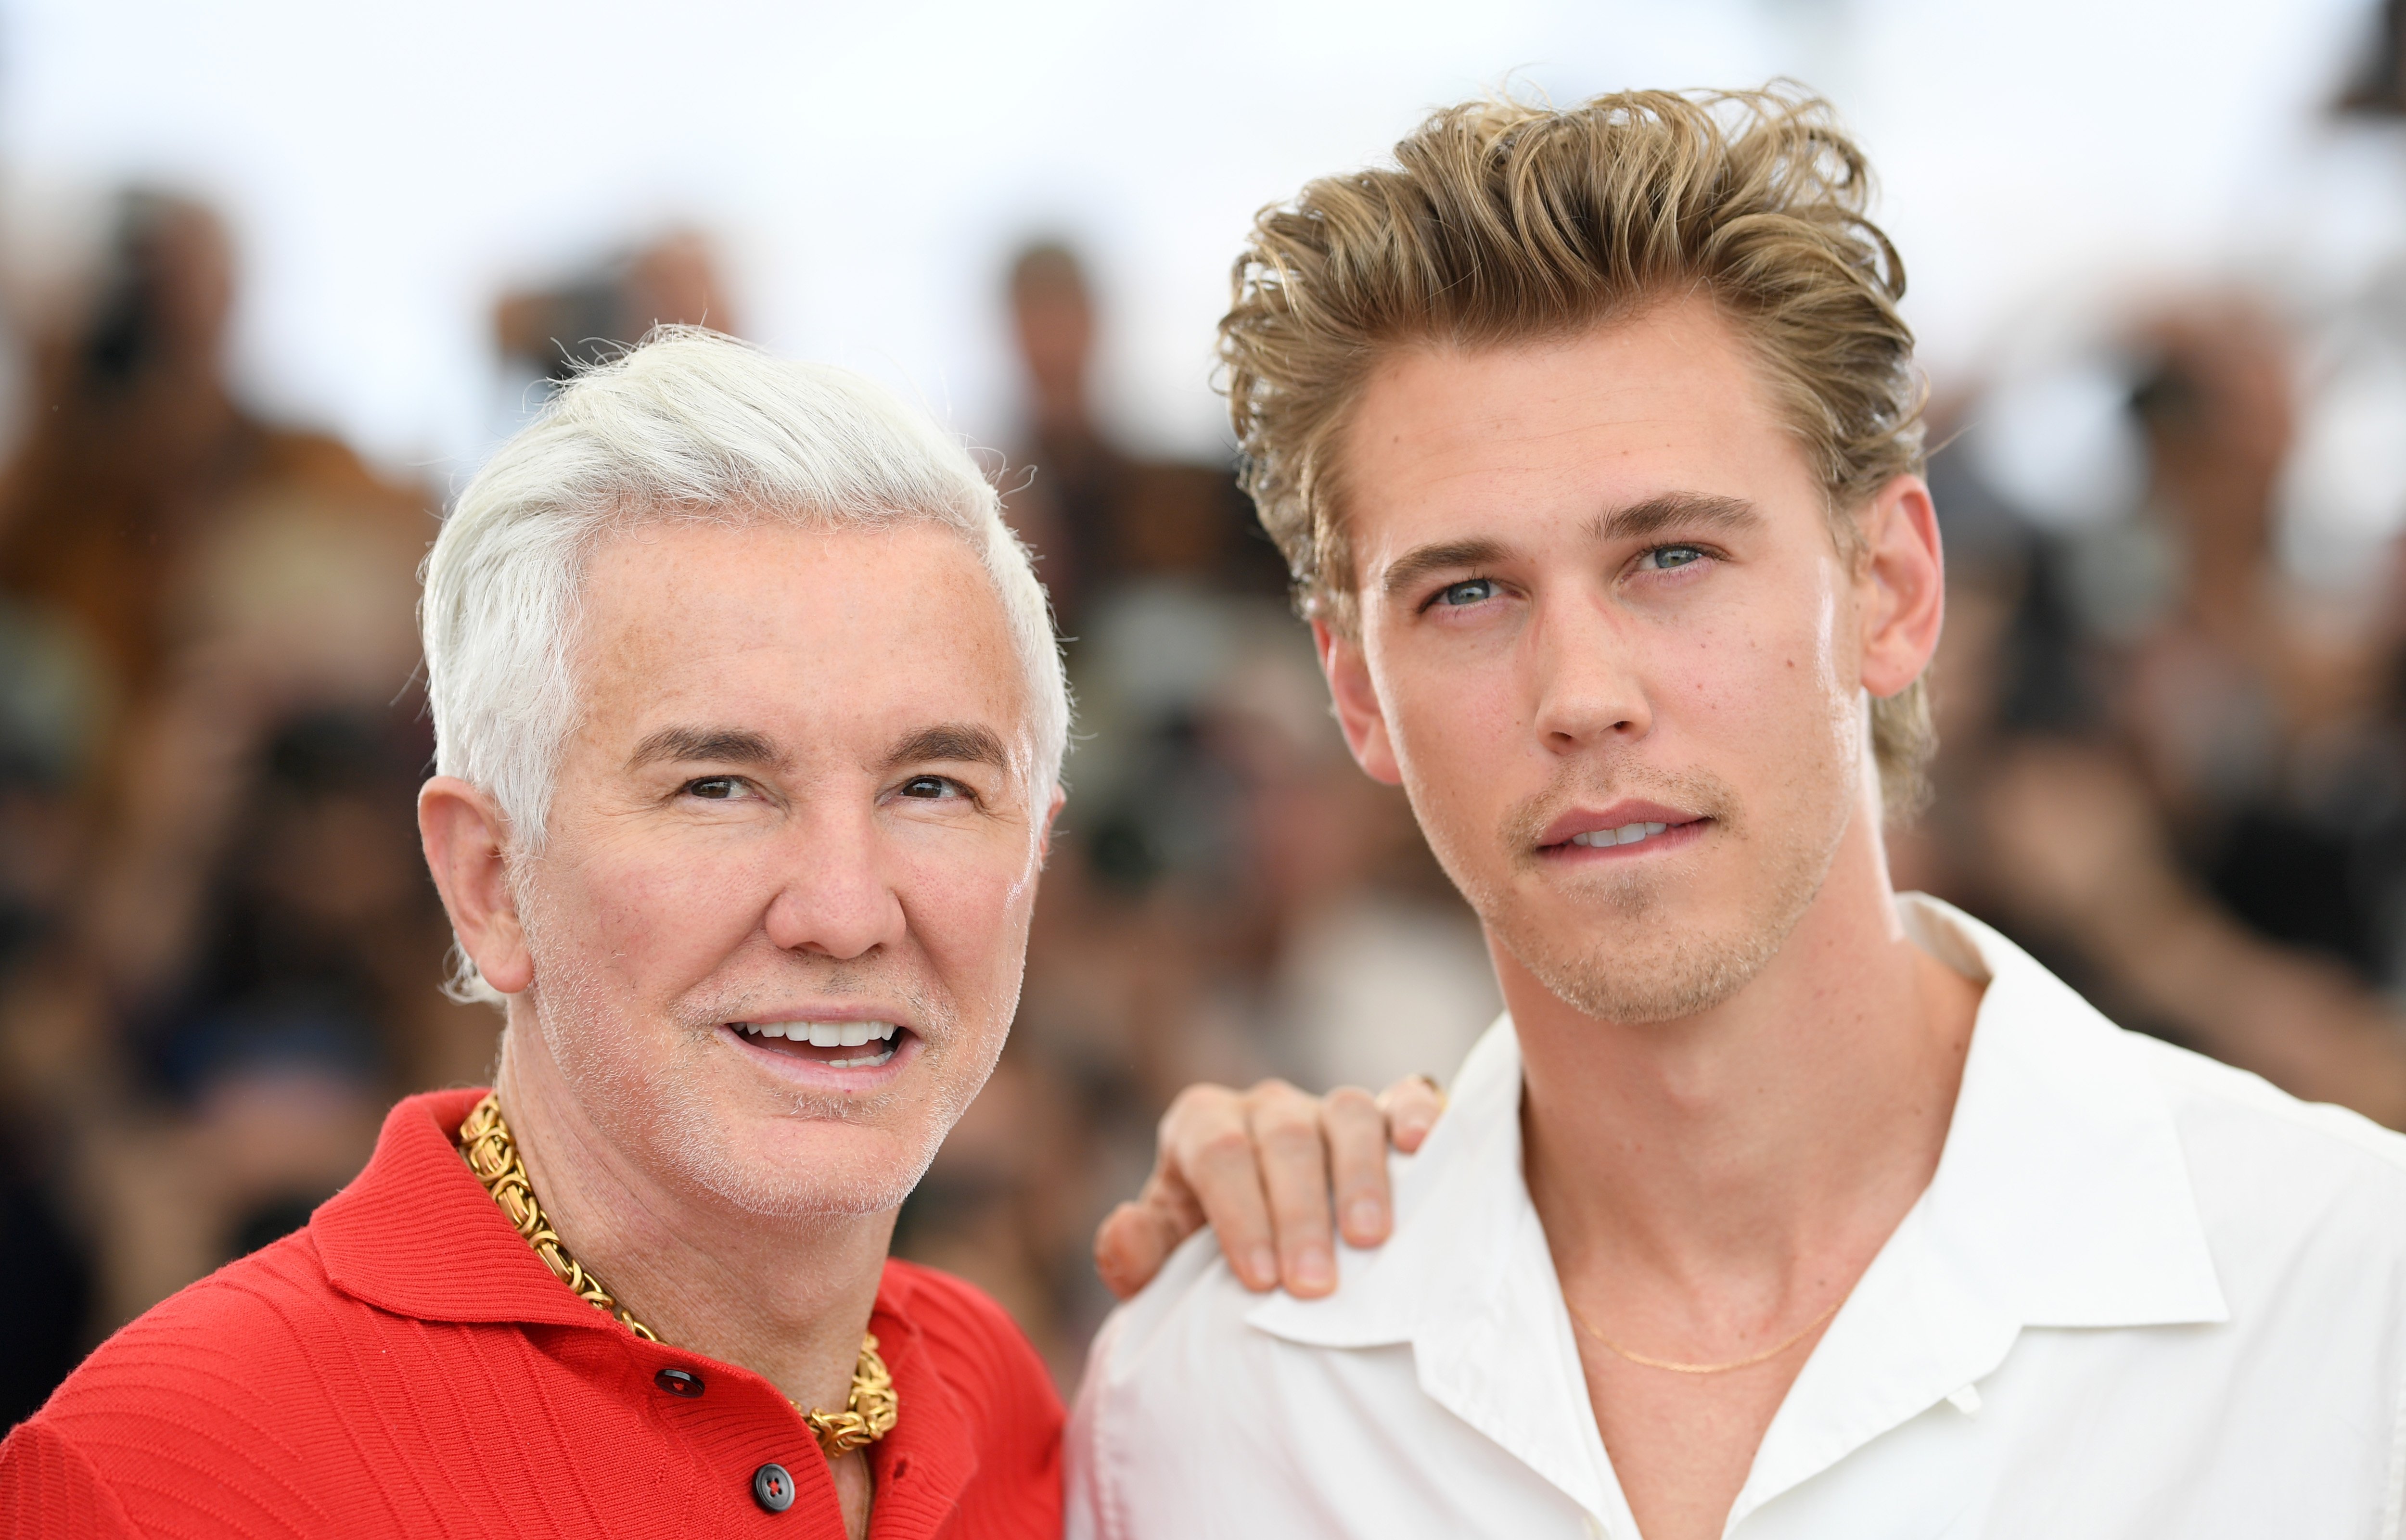 Baz Luhrmann and Austin Butler, the director and star of 'Elvis', standing next to each other